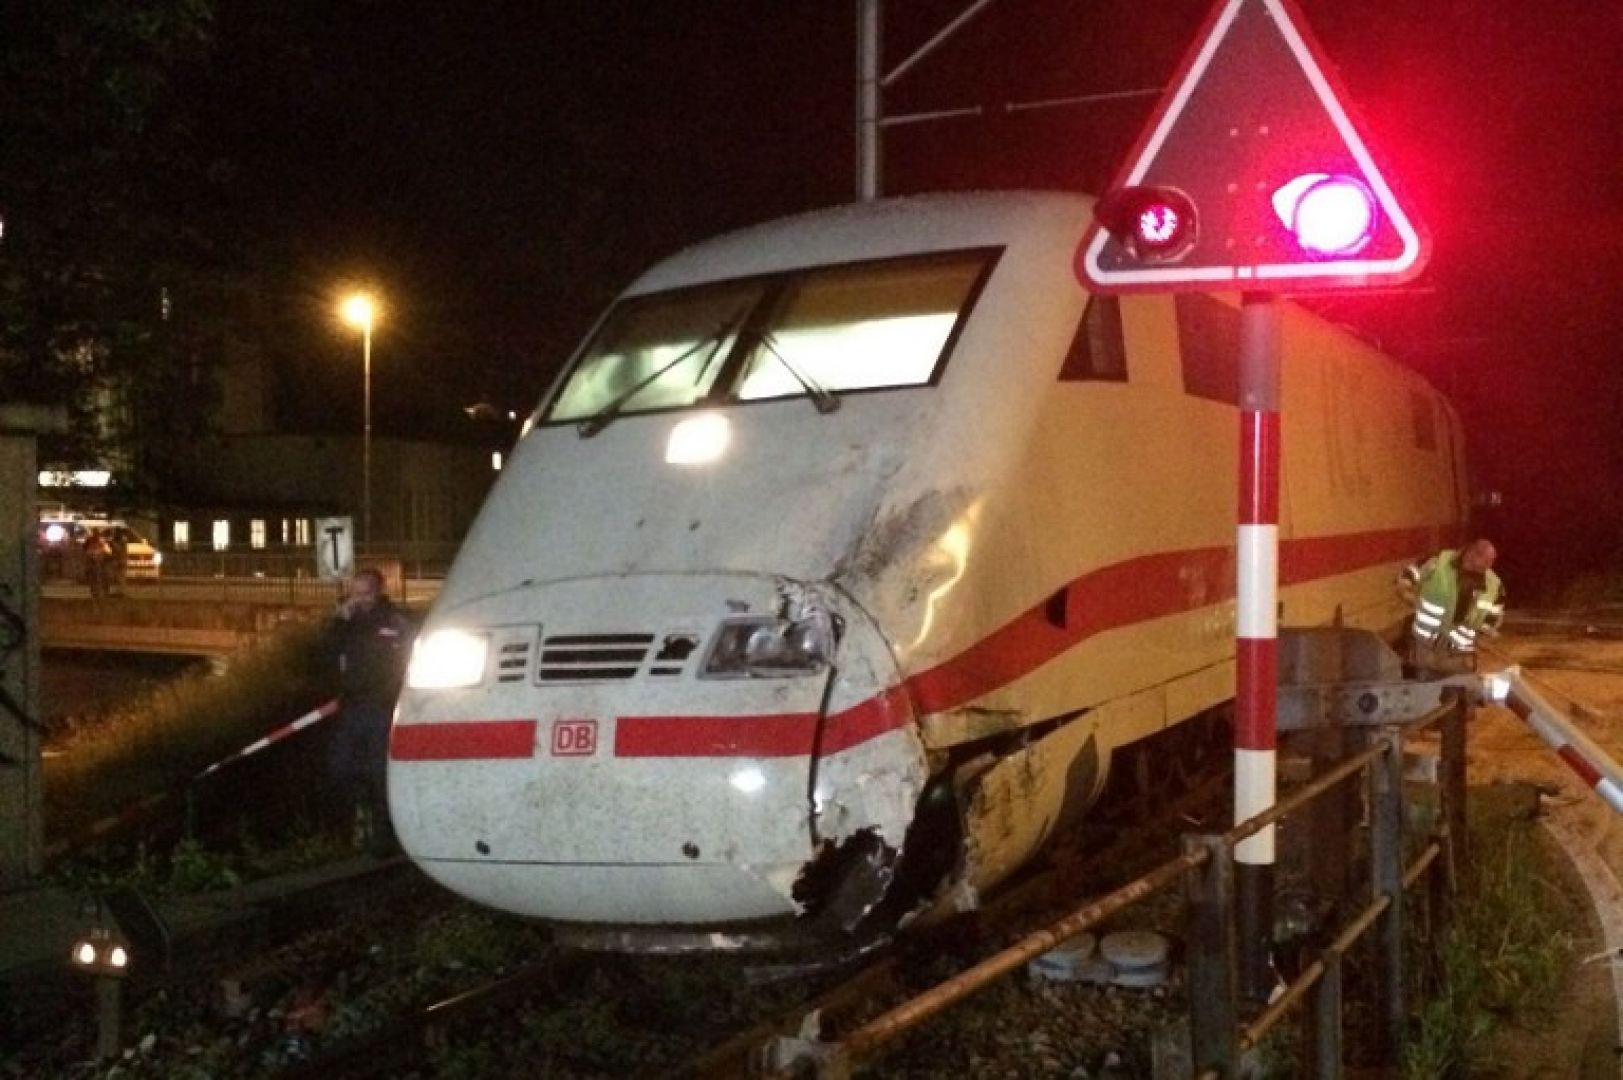 Six injured in attack on Swiss train; motive unknown, police say